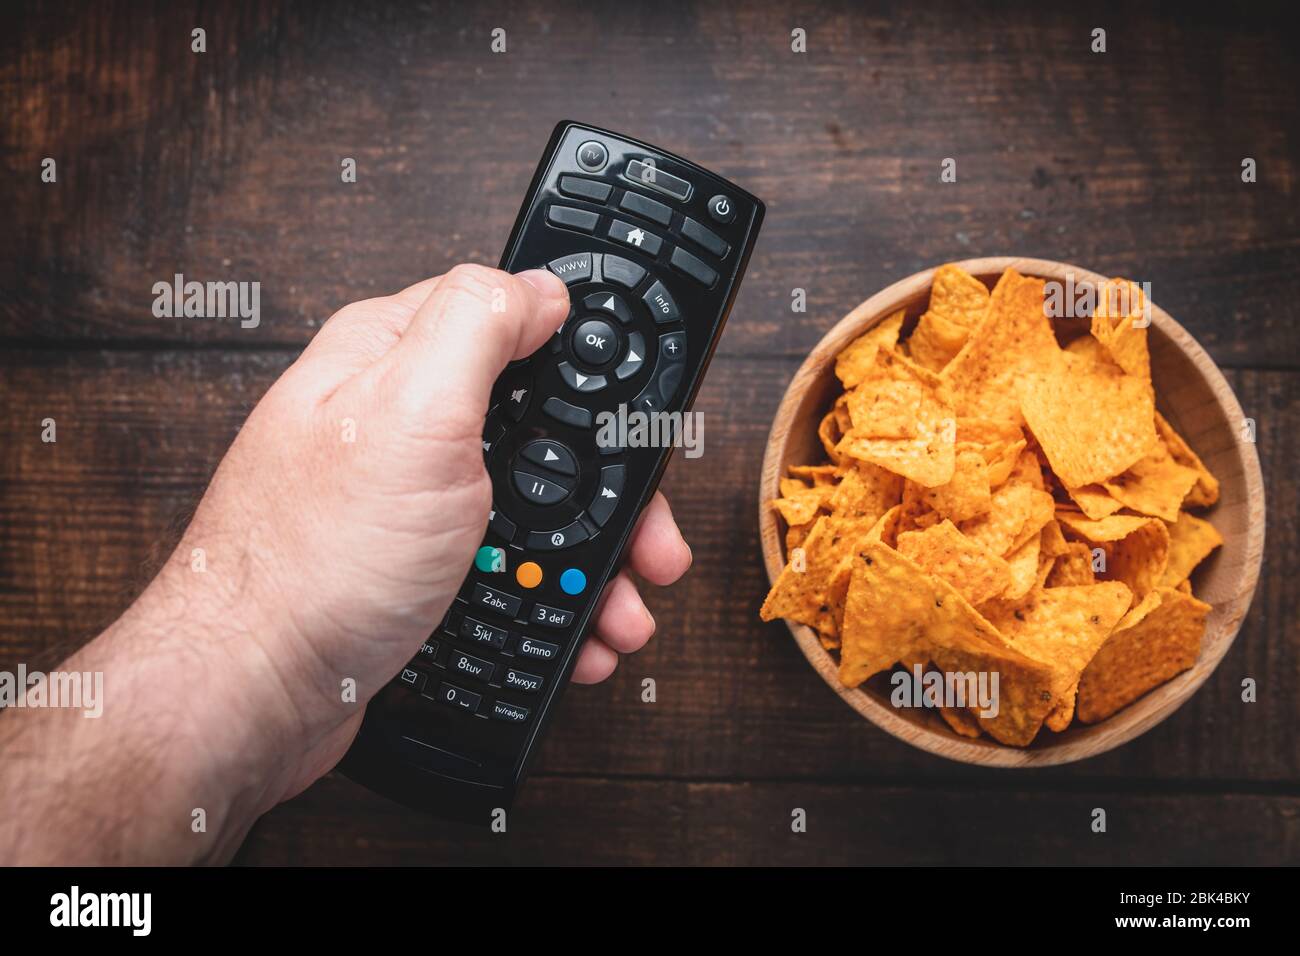 Chips in a wooden bowl next to the TV remote control against a burnt wooden background. Top view. Close up. Toned. Stock Photo